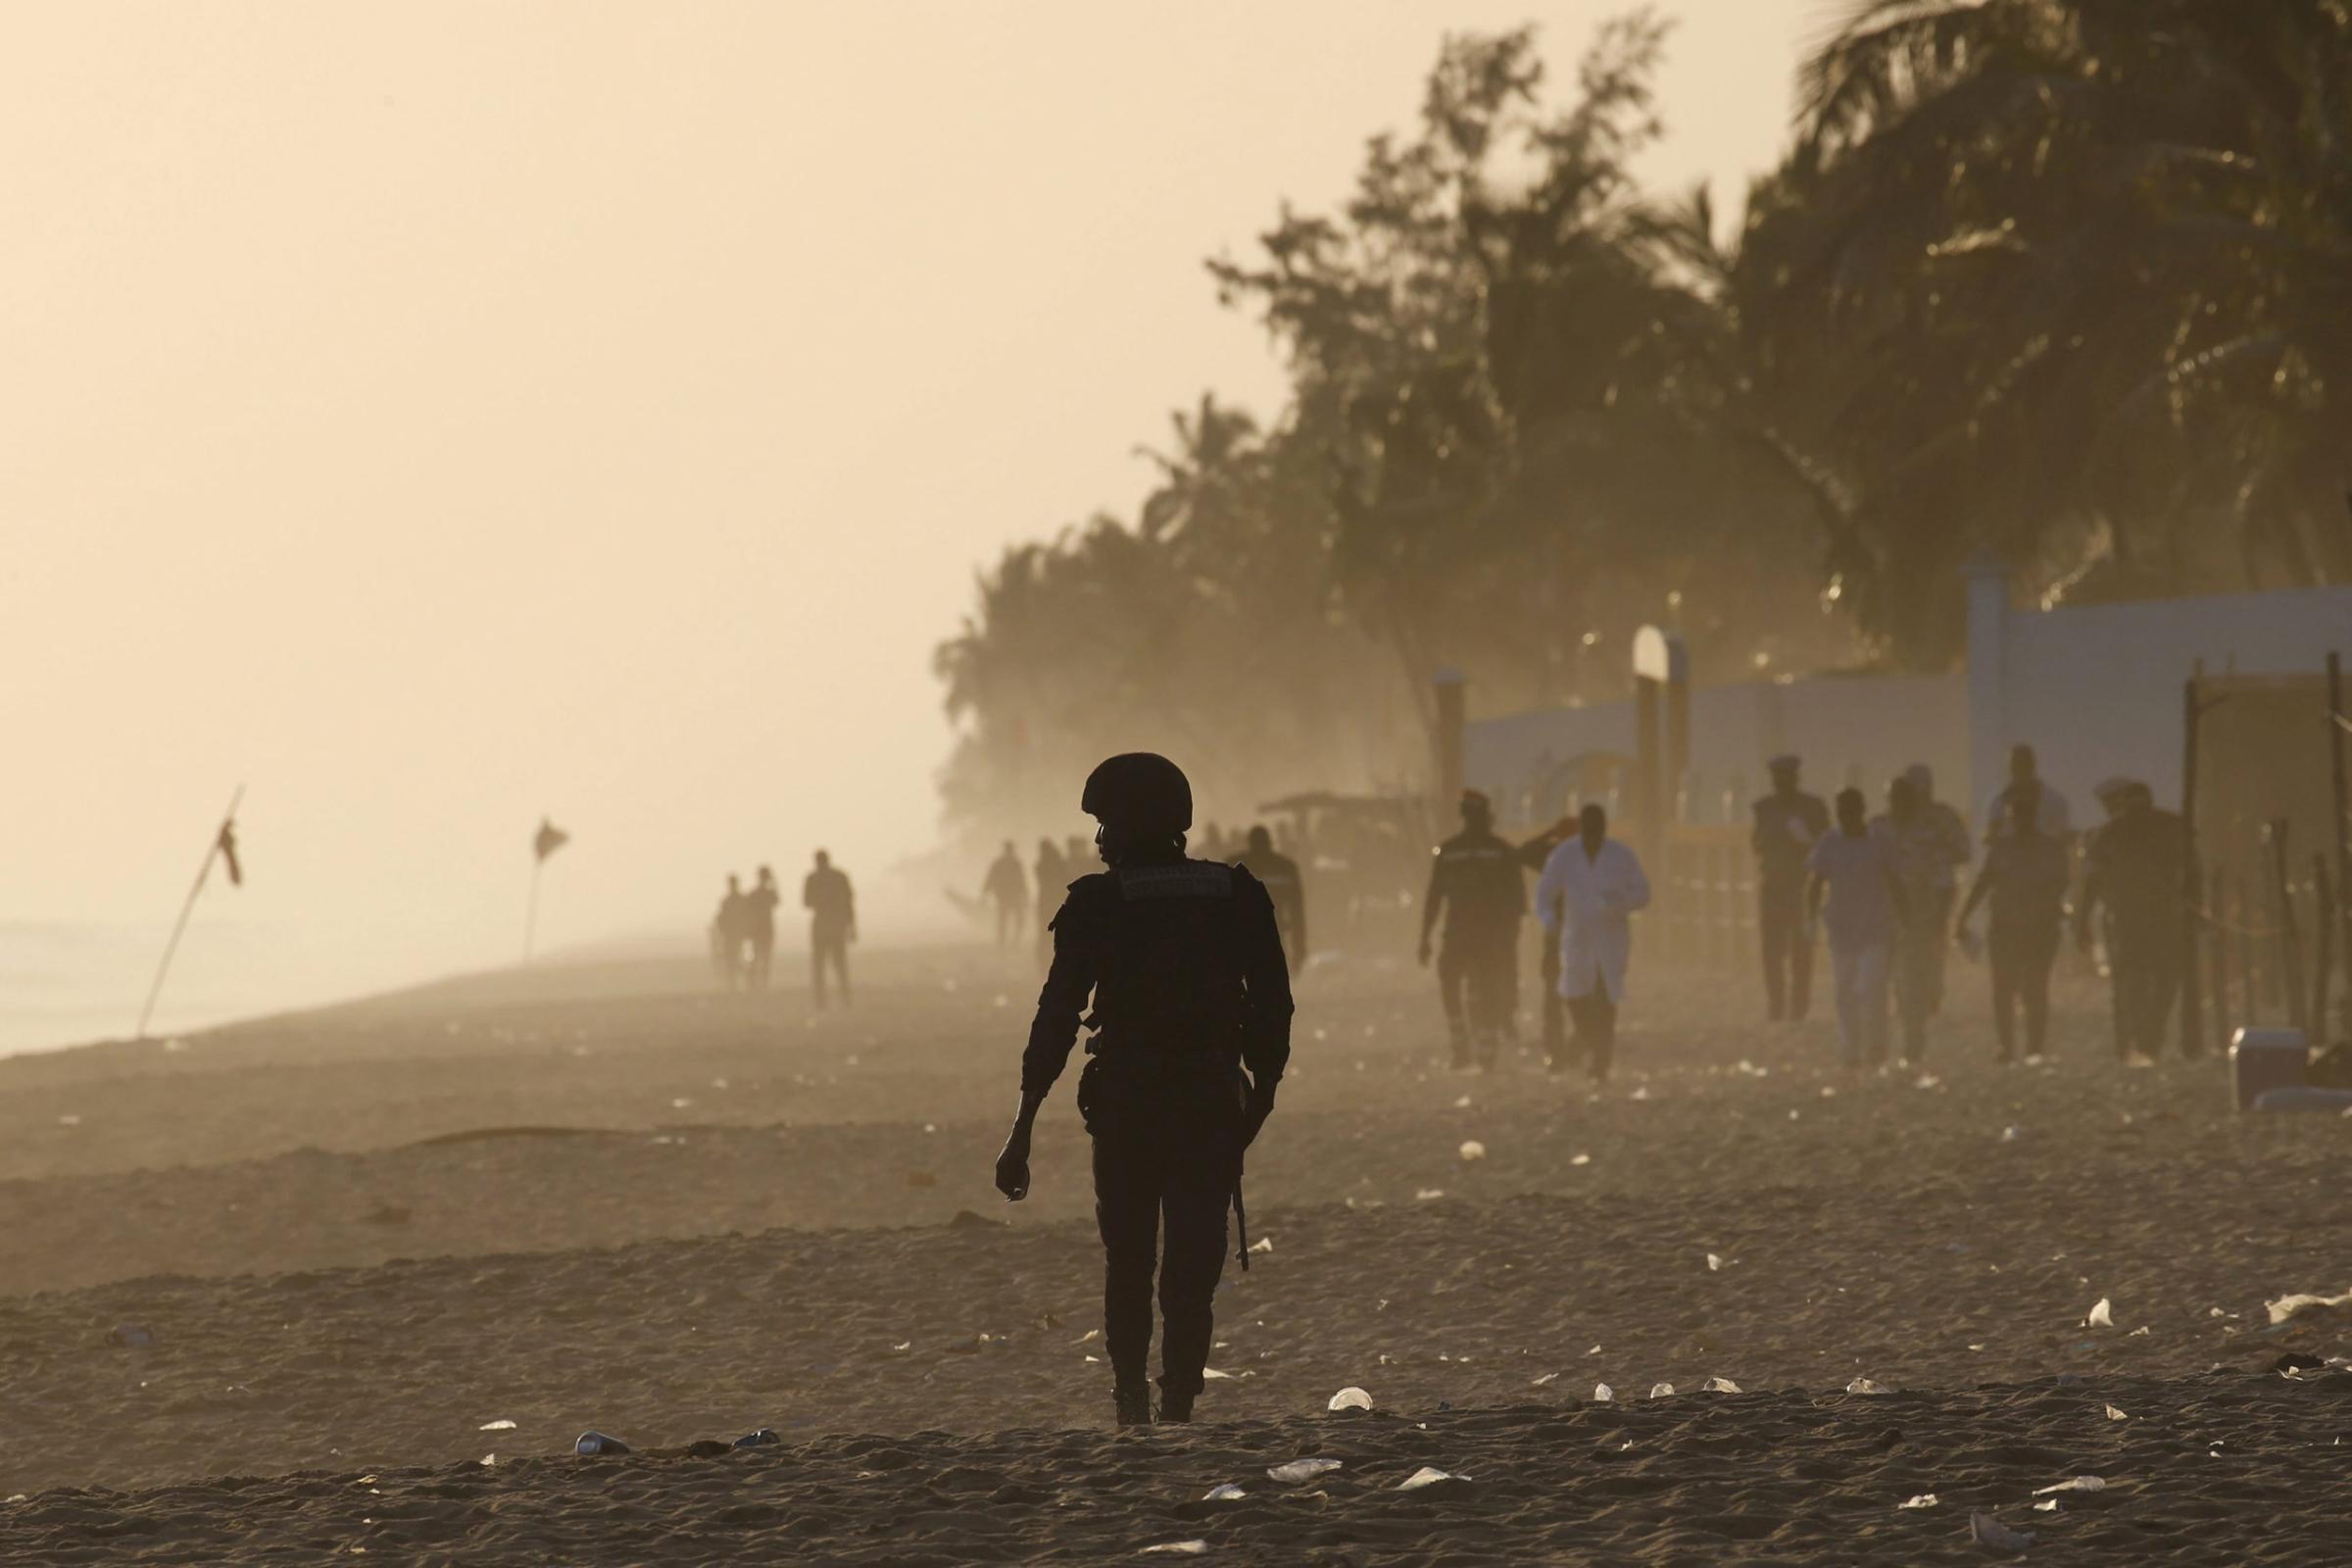 A security officer walks on the beach after an attack in Grand Bassam, Ivory Coast, March 13, 2016. REUTERS/Joe Penney